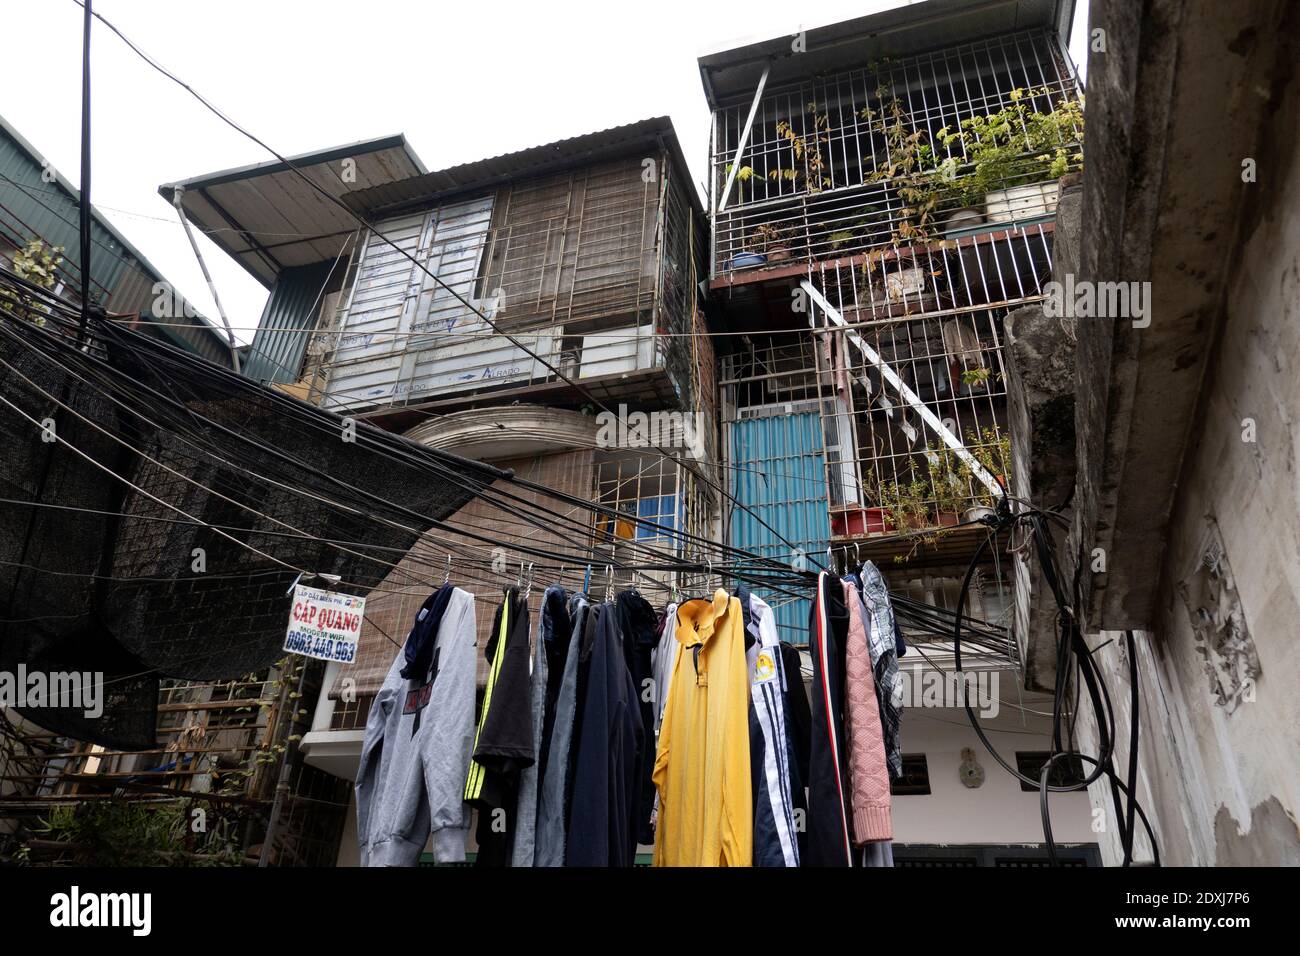 Laundry hung out to dry on power lines in Hanoi Stock Photo